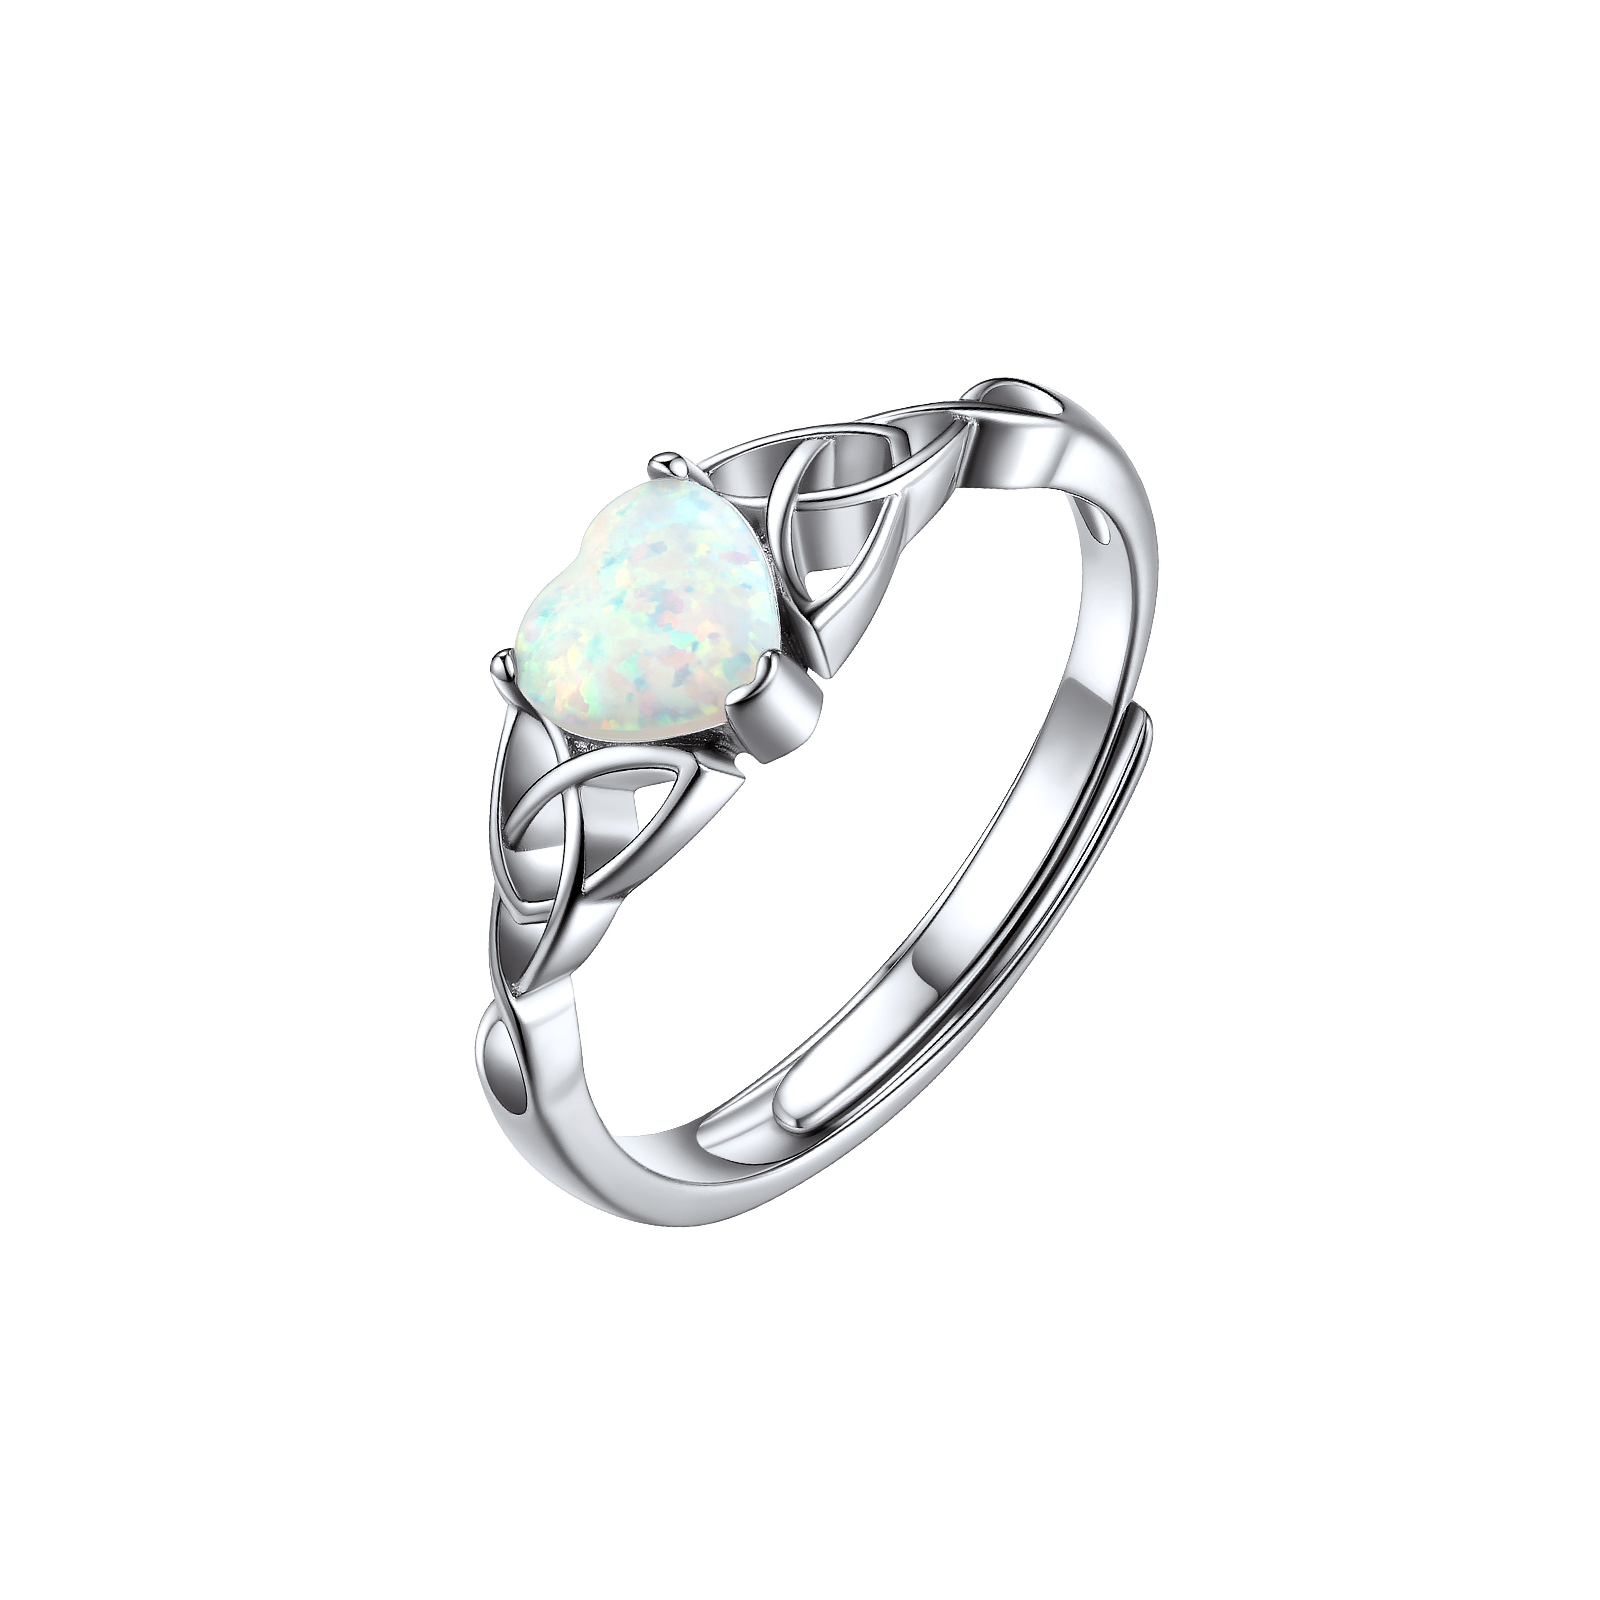 ChicSilver Sterling Silver Celtic Knot Heart Opal Ring